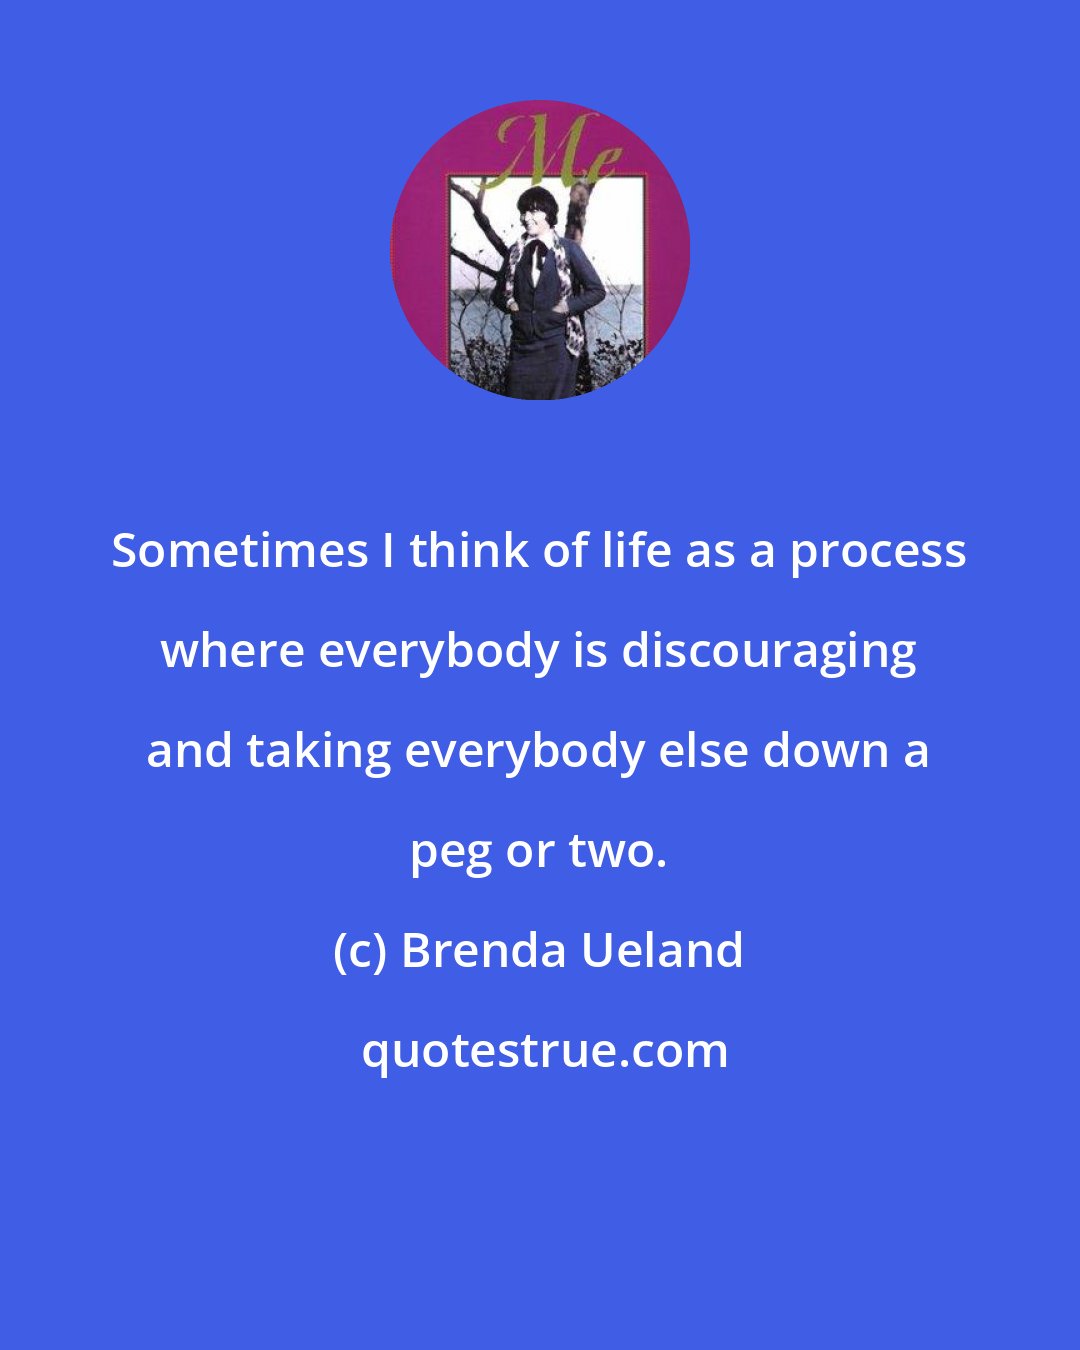 Brenda Ueland: Sometimes I think of life as a process where everybody is discouraging and taking everybody else down a peg or two.